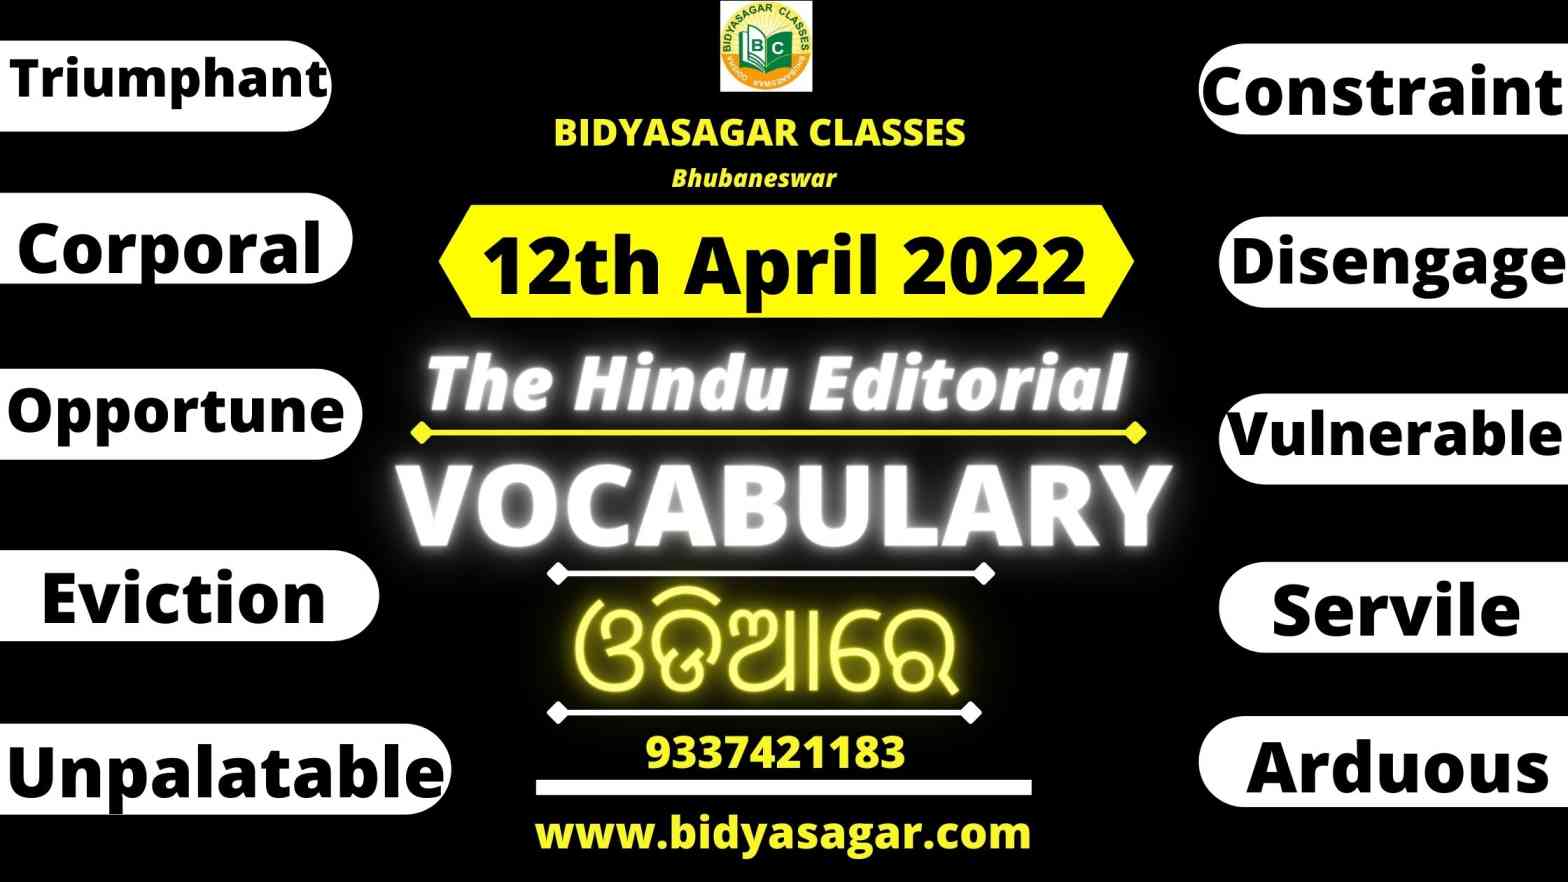 The Hindu Editorial Vocabulary of 12th April 2022